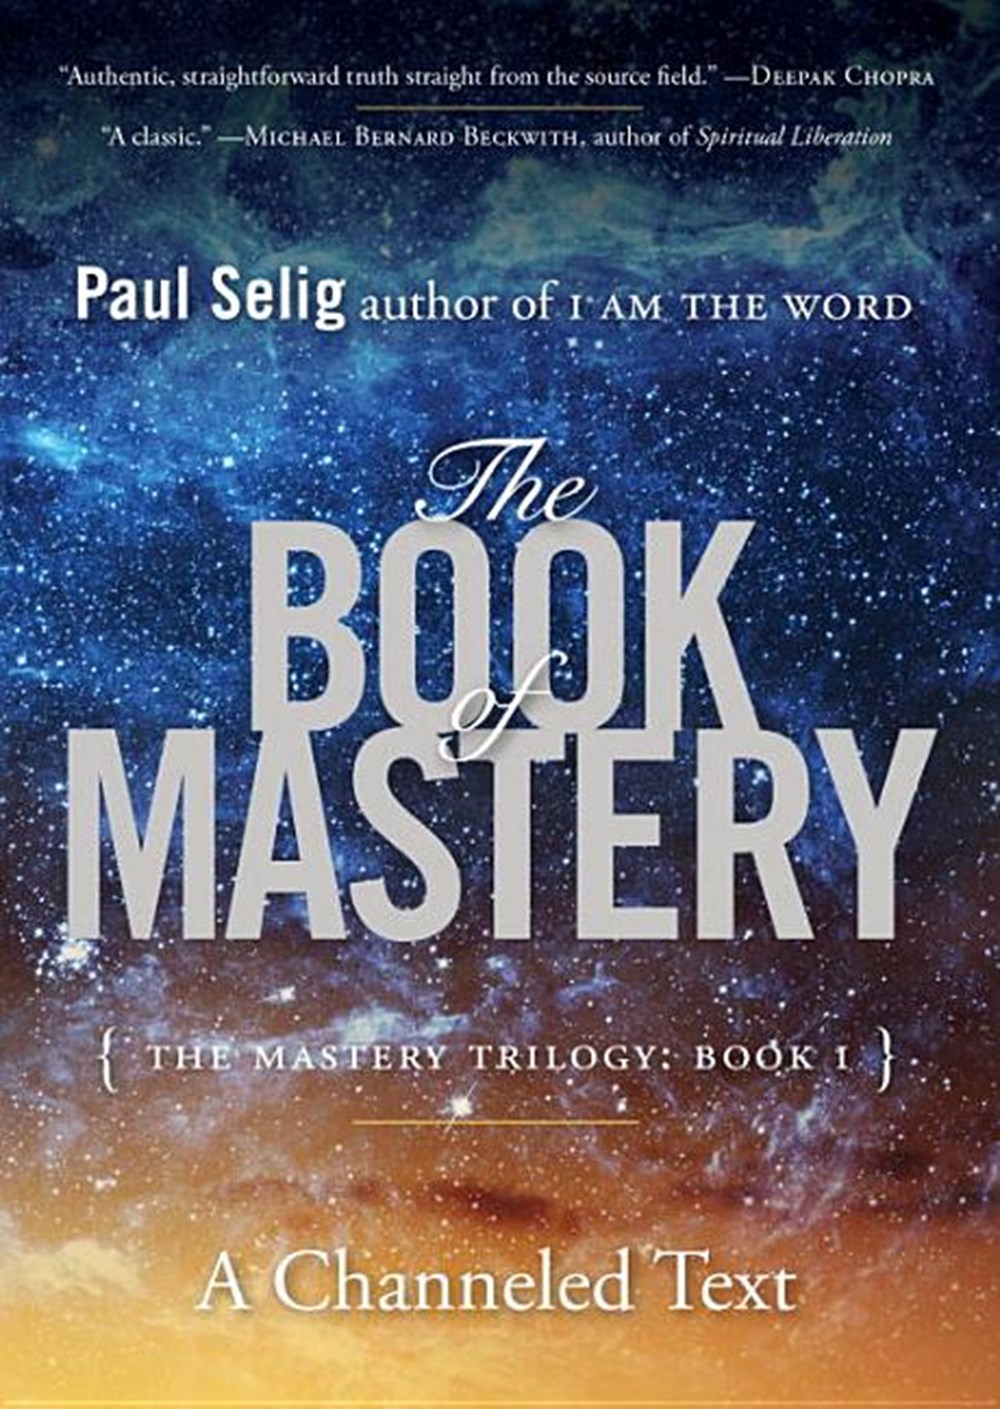 Book of Mastery: The Mastery Trilogy: Book I